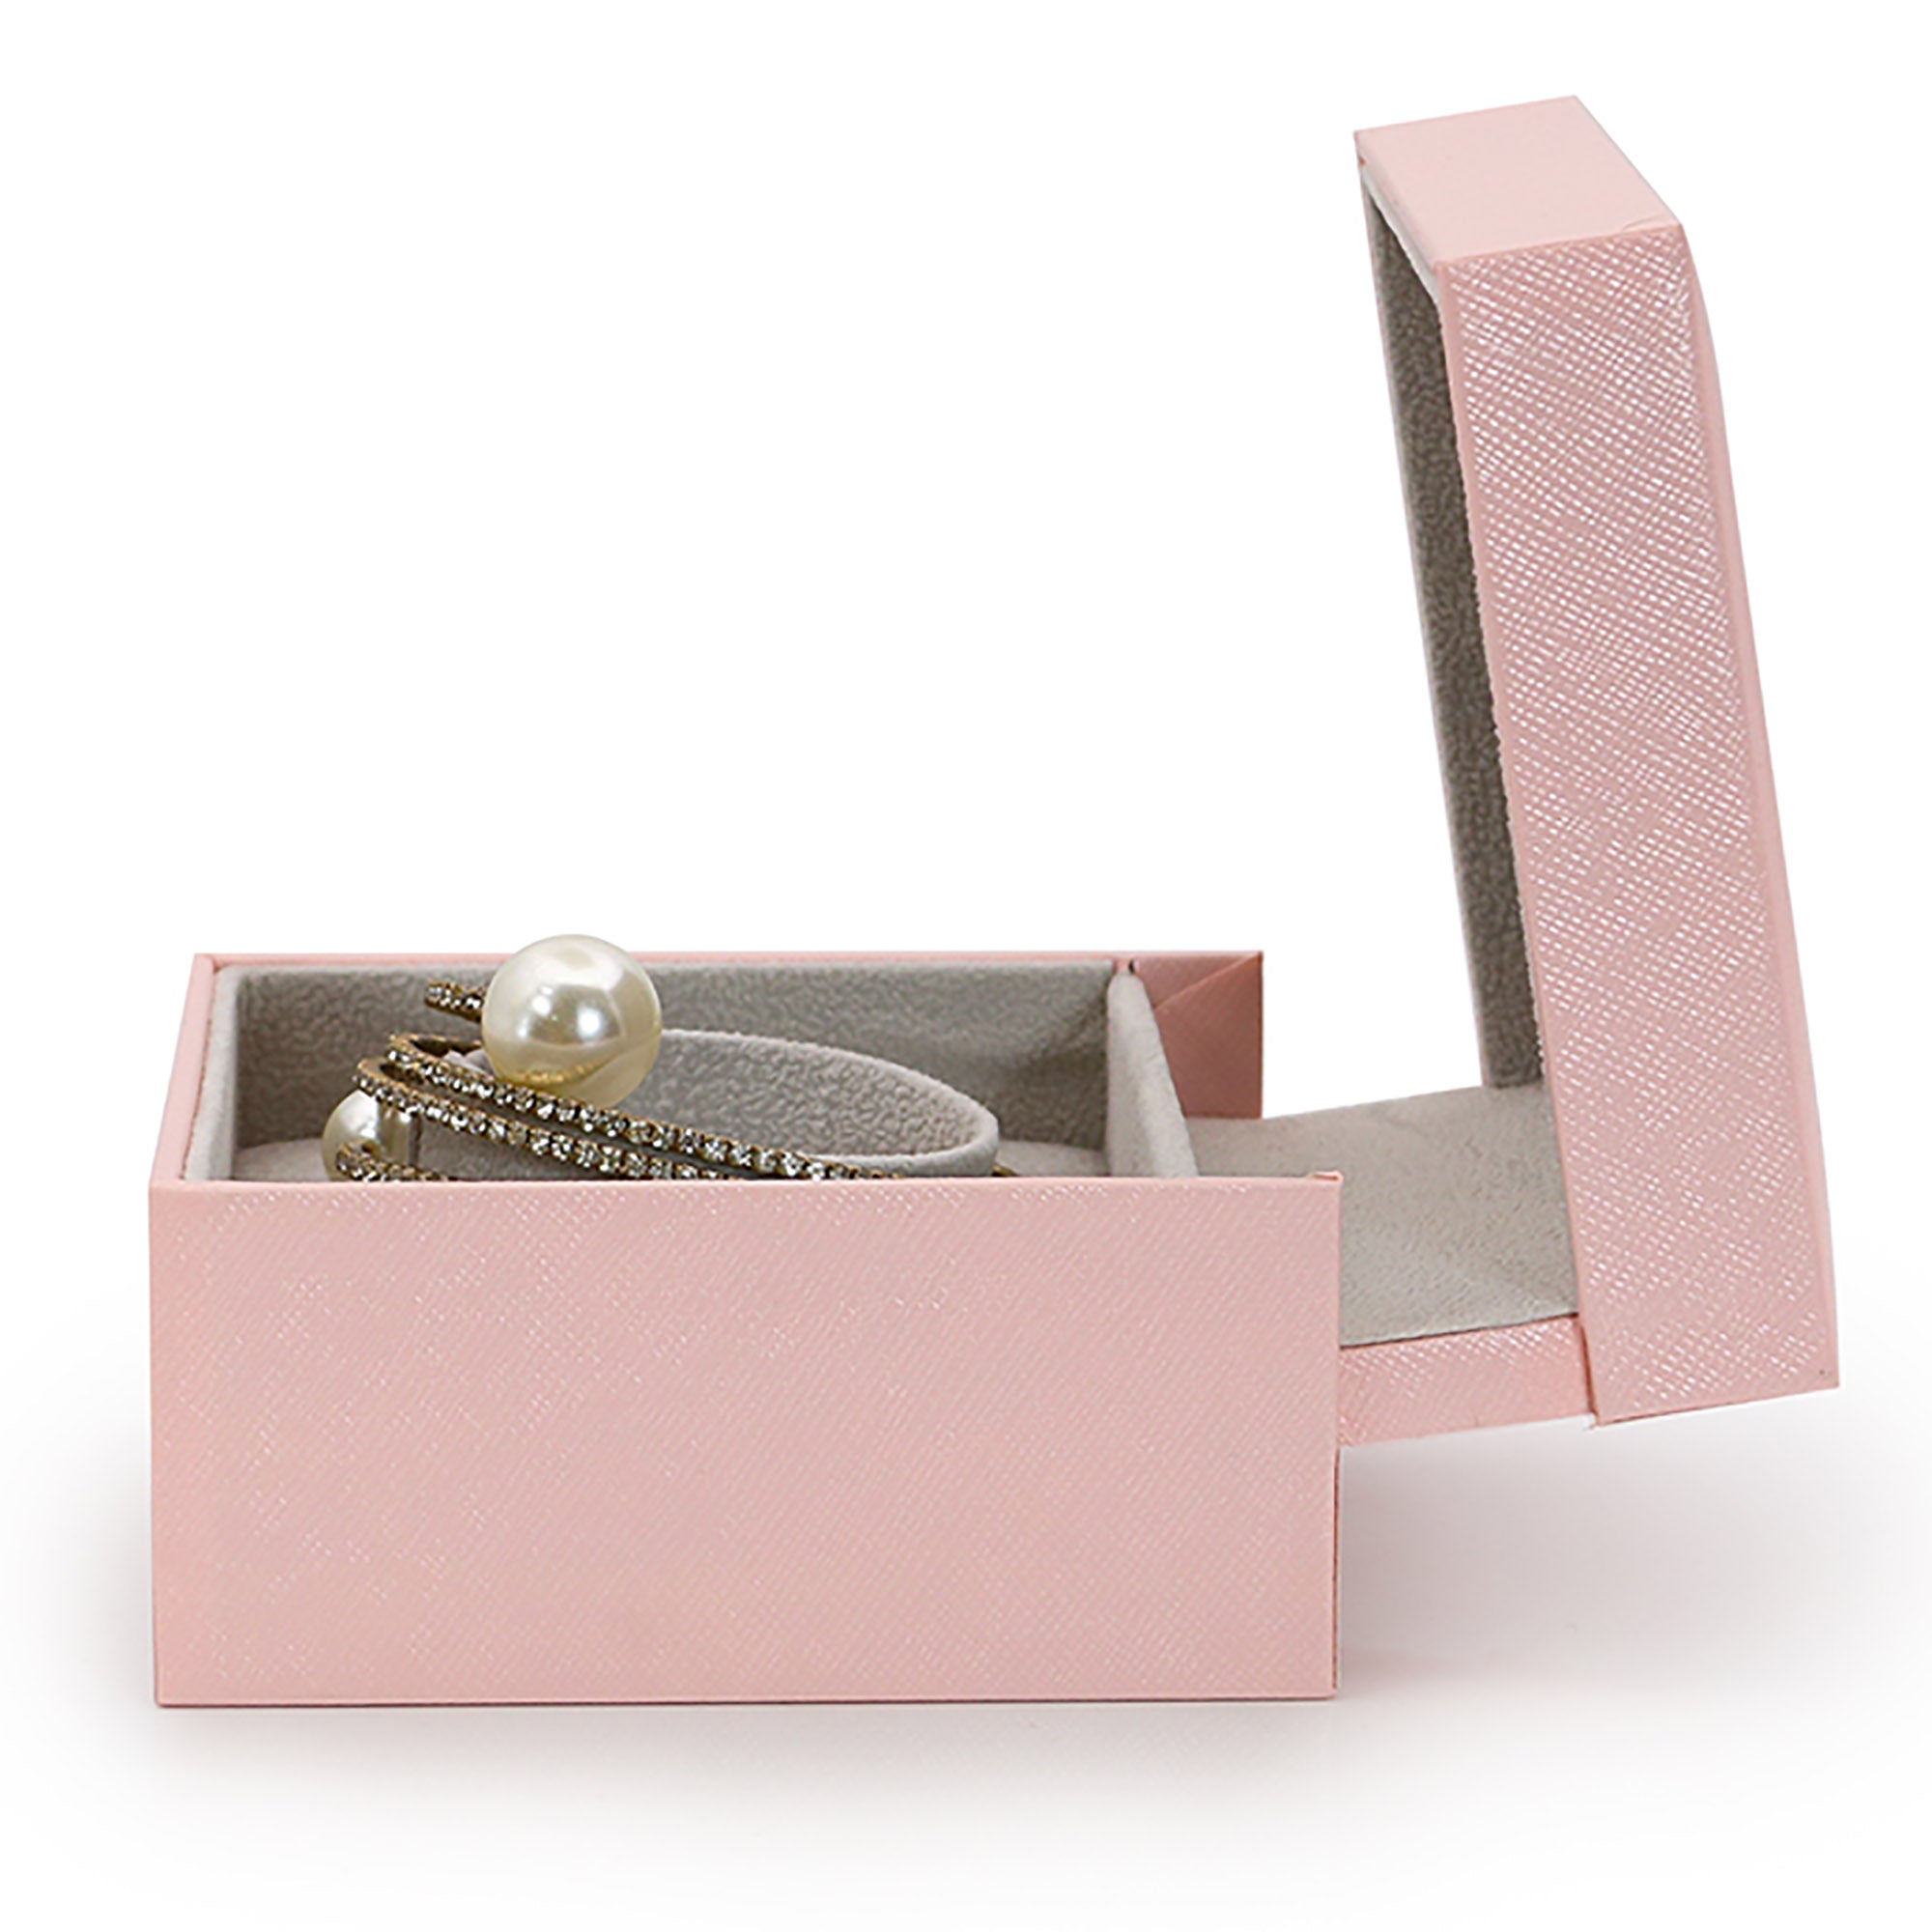 Copy of Pink Jewelry Box / Gift Box Vintage Gift Home Deco Decoration Design